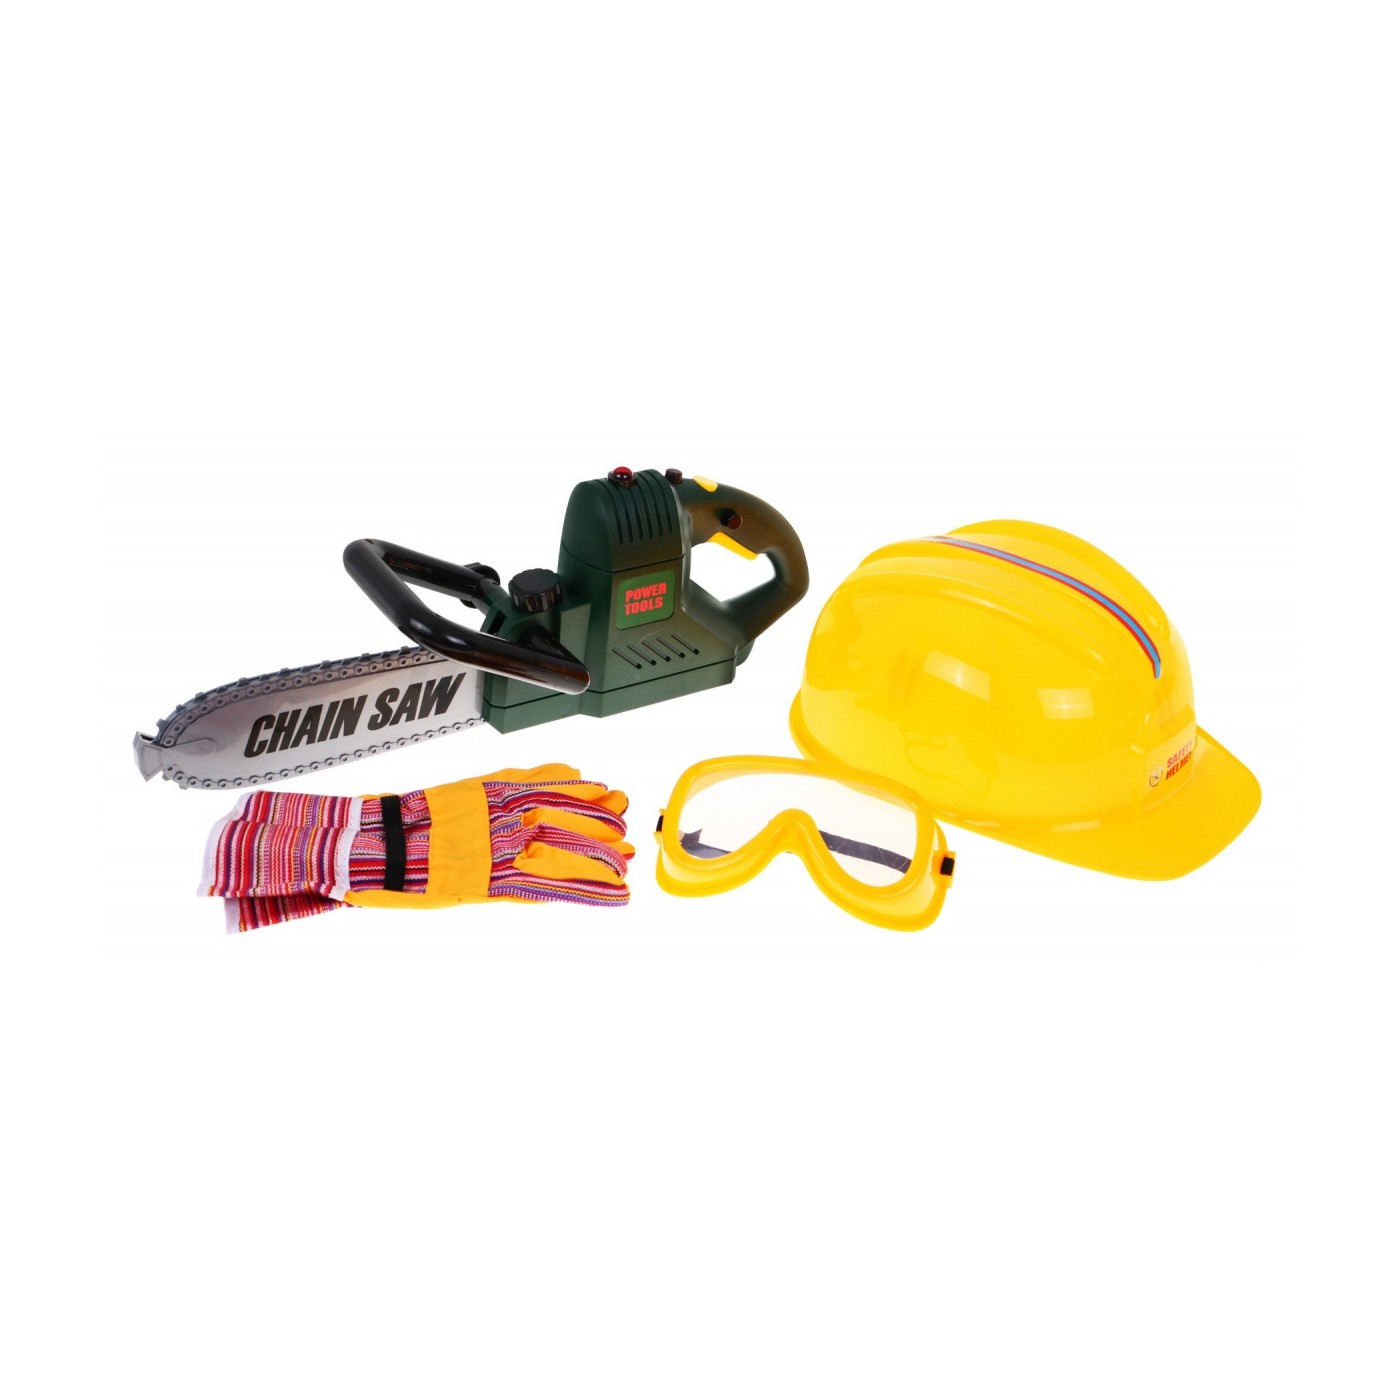 Large chainsaw set, gloves, goggle and helmet